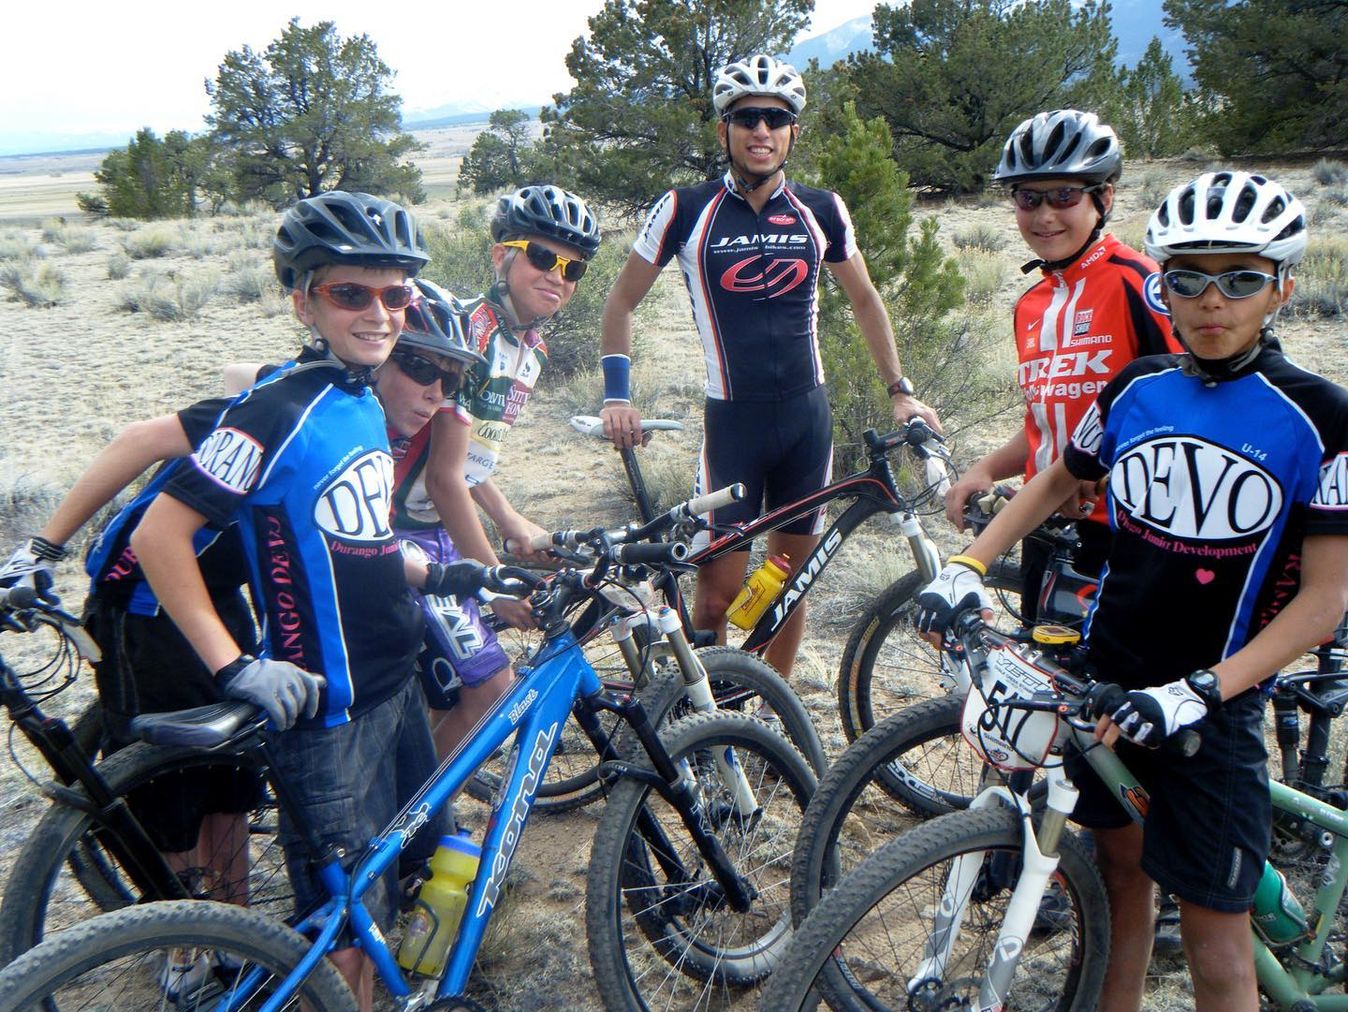 Kuss (third from left) out the mountain bikes with Chris Blevins (furthest right)